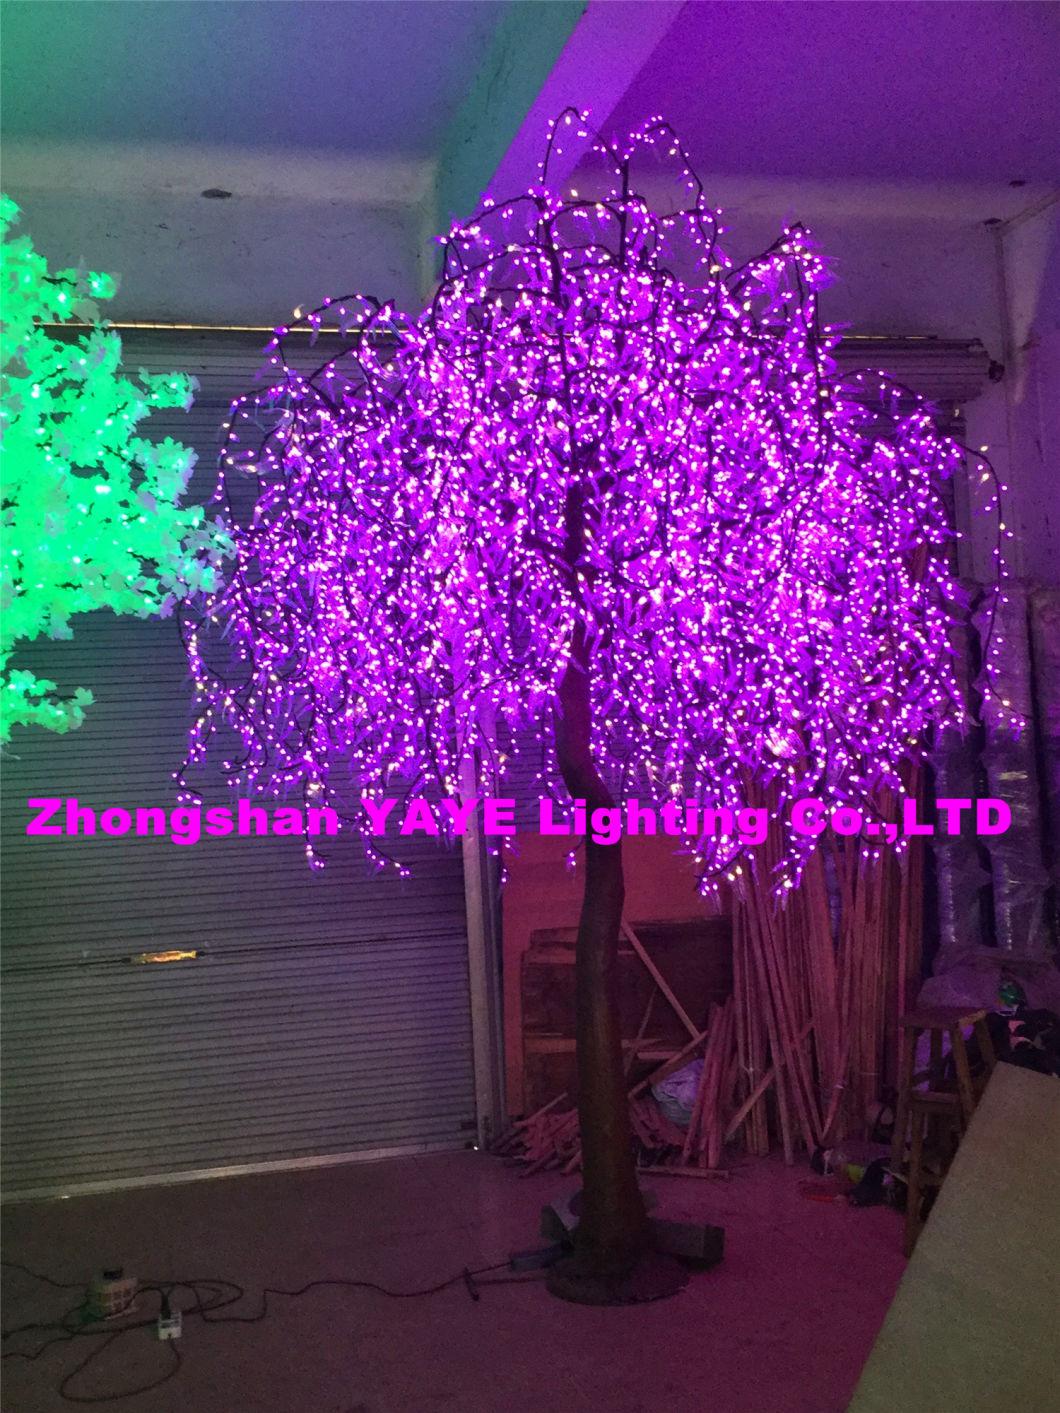 Yaye 2021 Hot Sell Competive Price CE/RoHS Outdoor/Indoor IP65 RGB LED Willow Tree Light with 2 Years Warranty